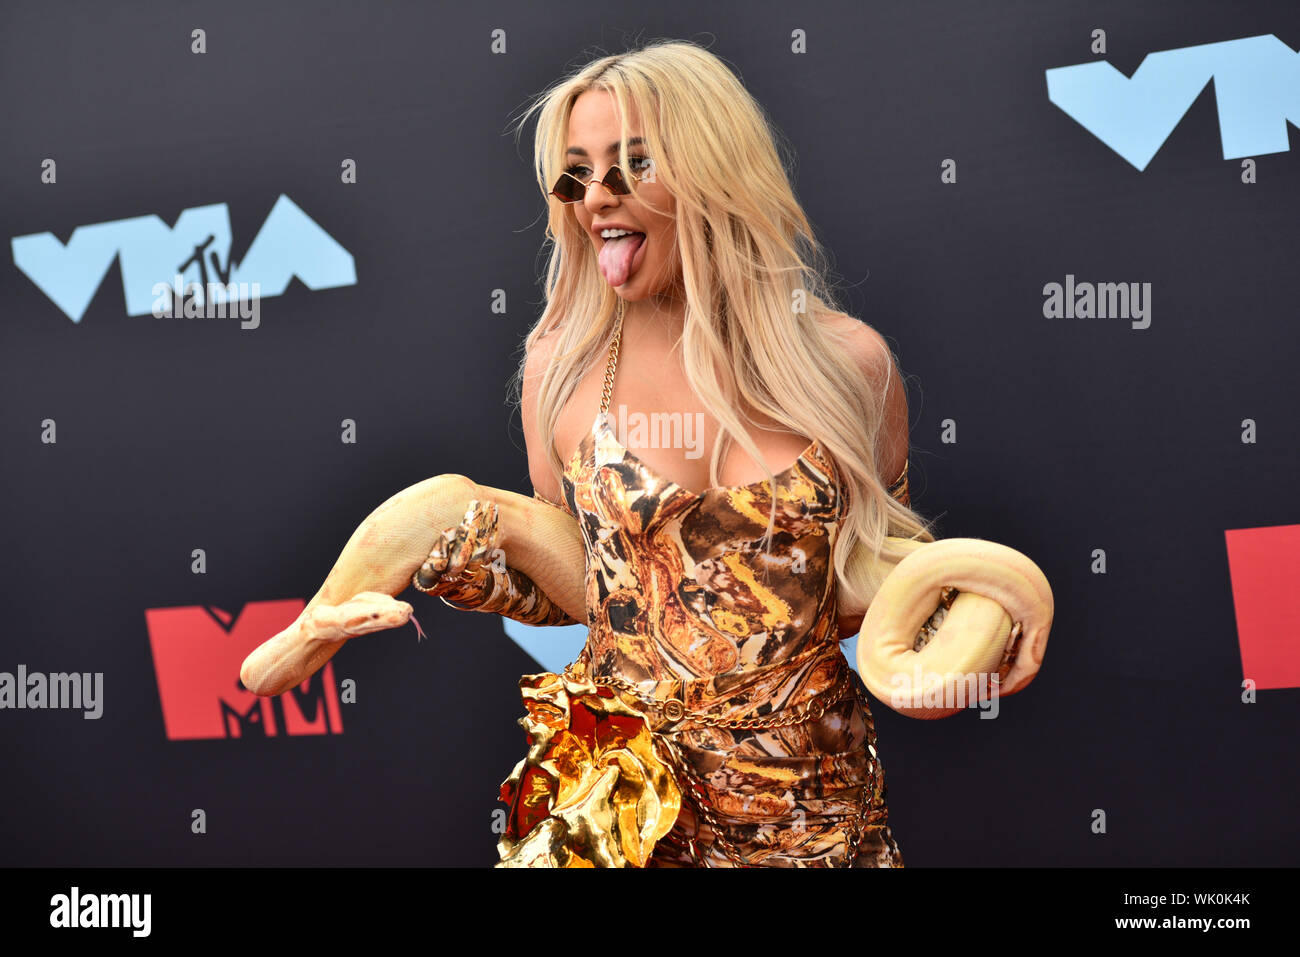 Tana Mongeau attends the 2019 MTV Video Music Awards at Prudential Center on August 26, 2019 in Newark, New Jersey. Stock Photo